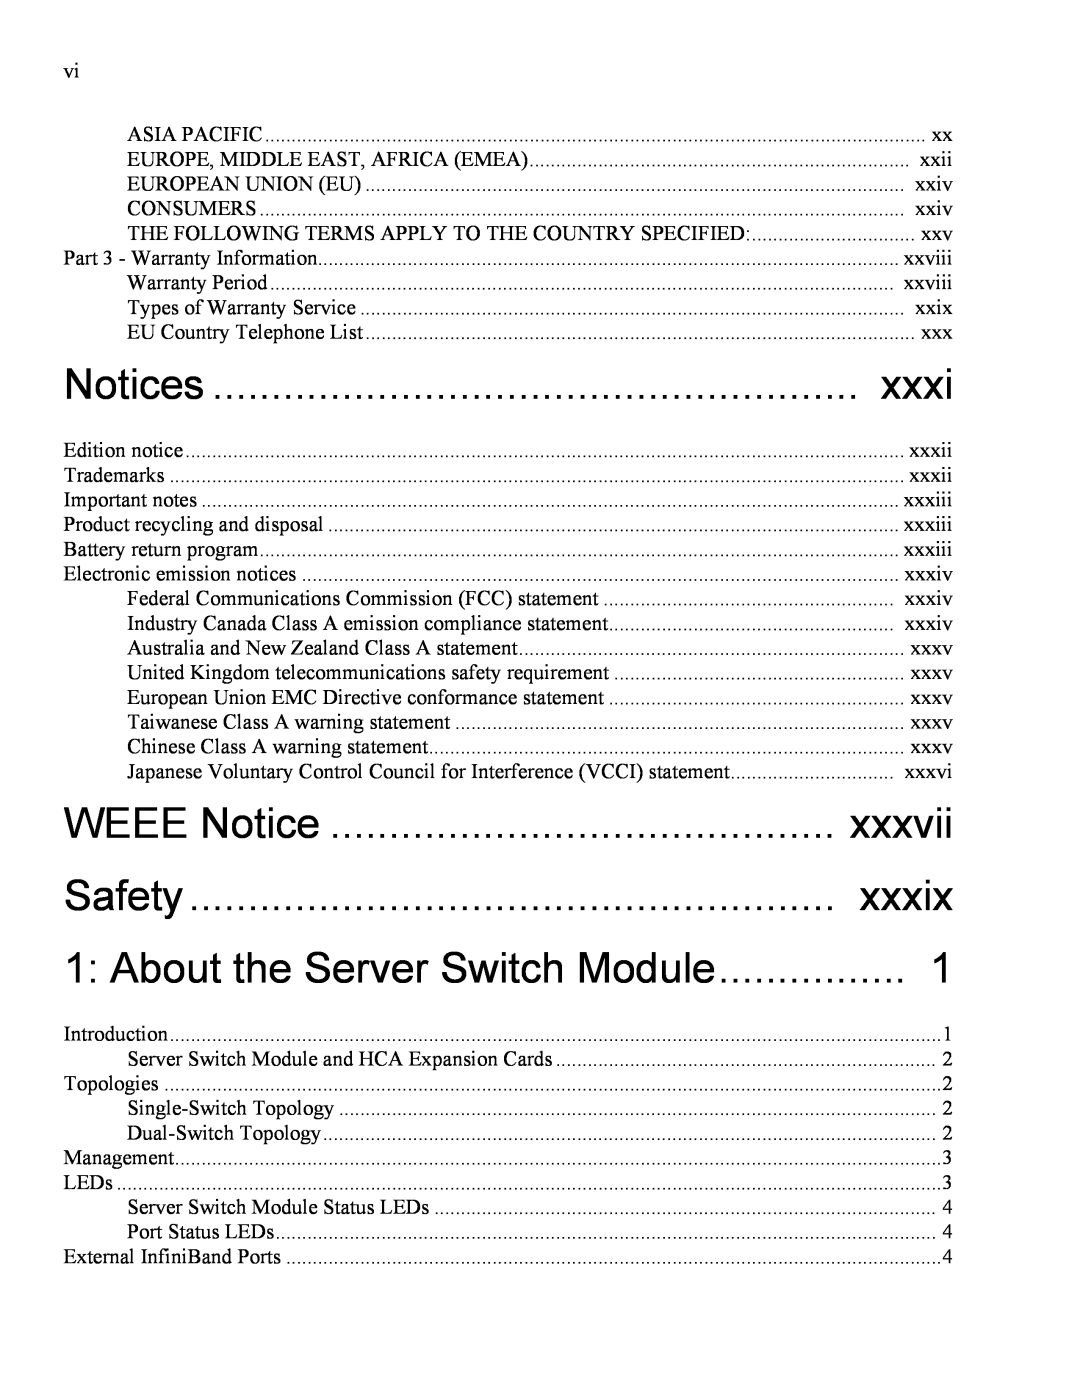 IBM 24R9718 IB manual WEEE Notice, xxxvii, Safety, xxxix, Notices, About the Server Switch Module 